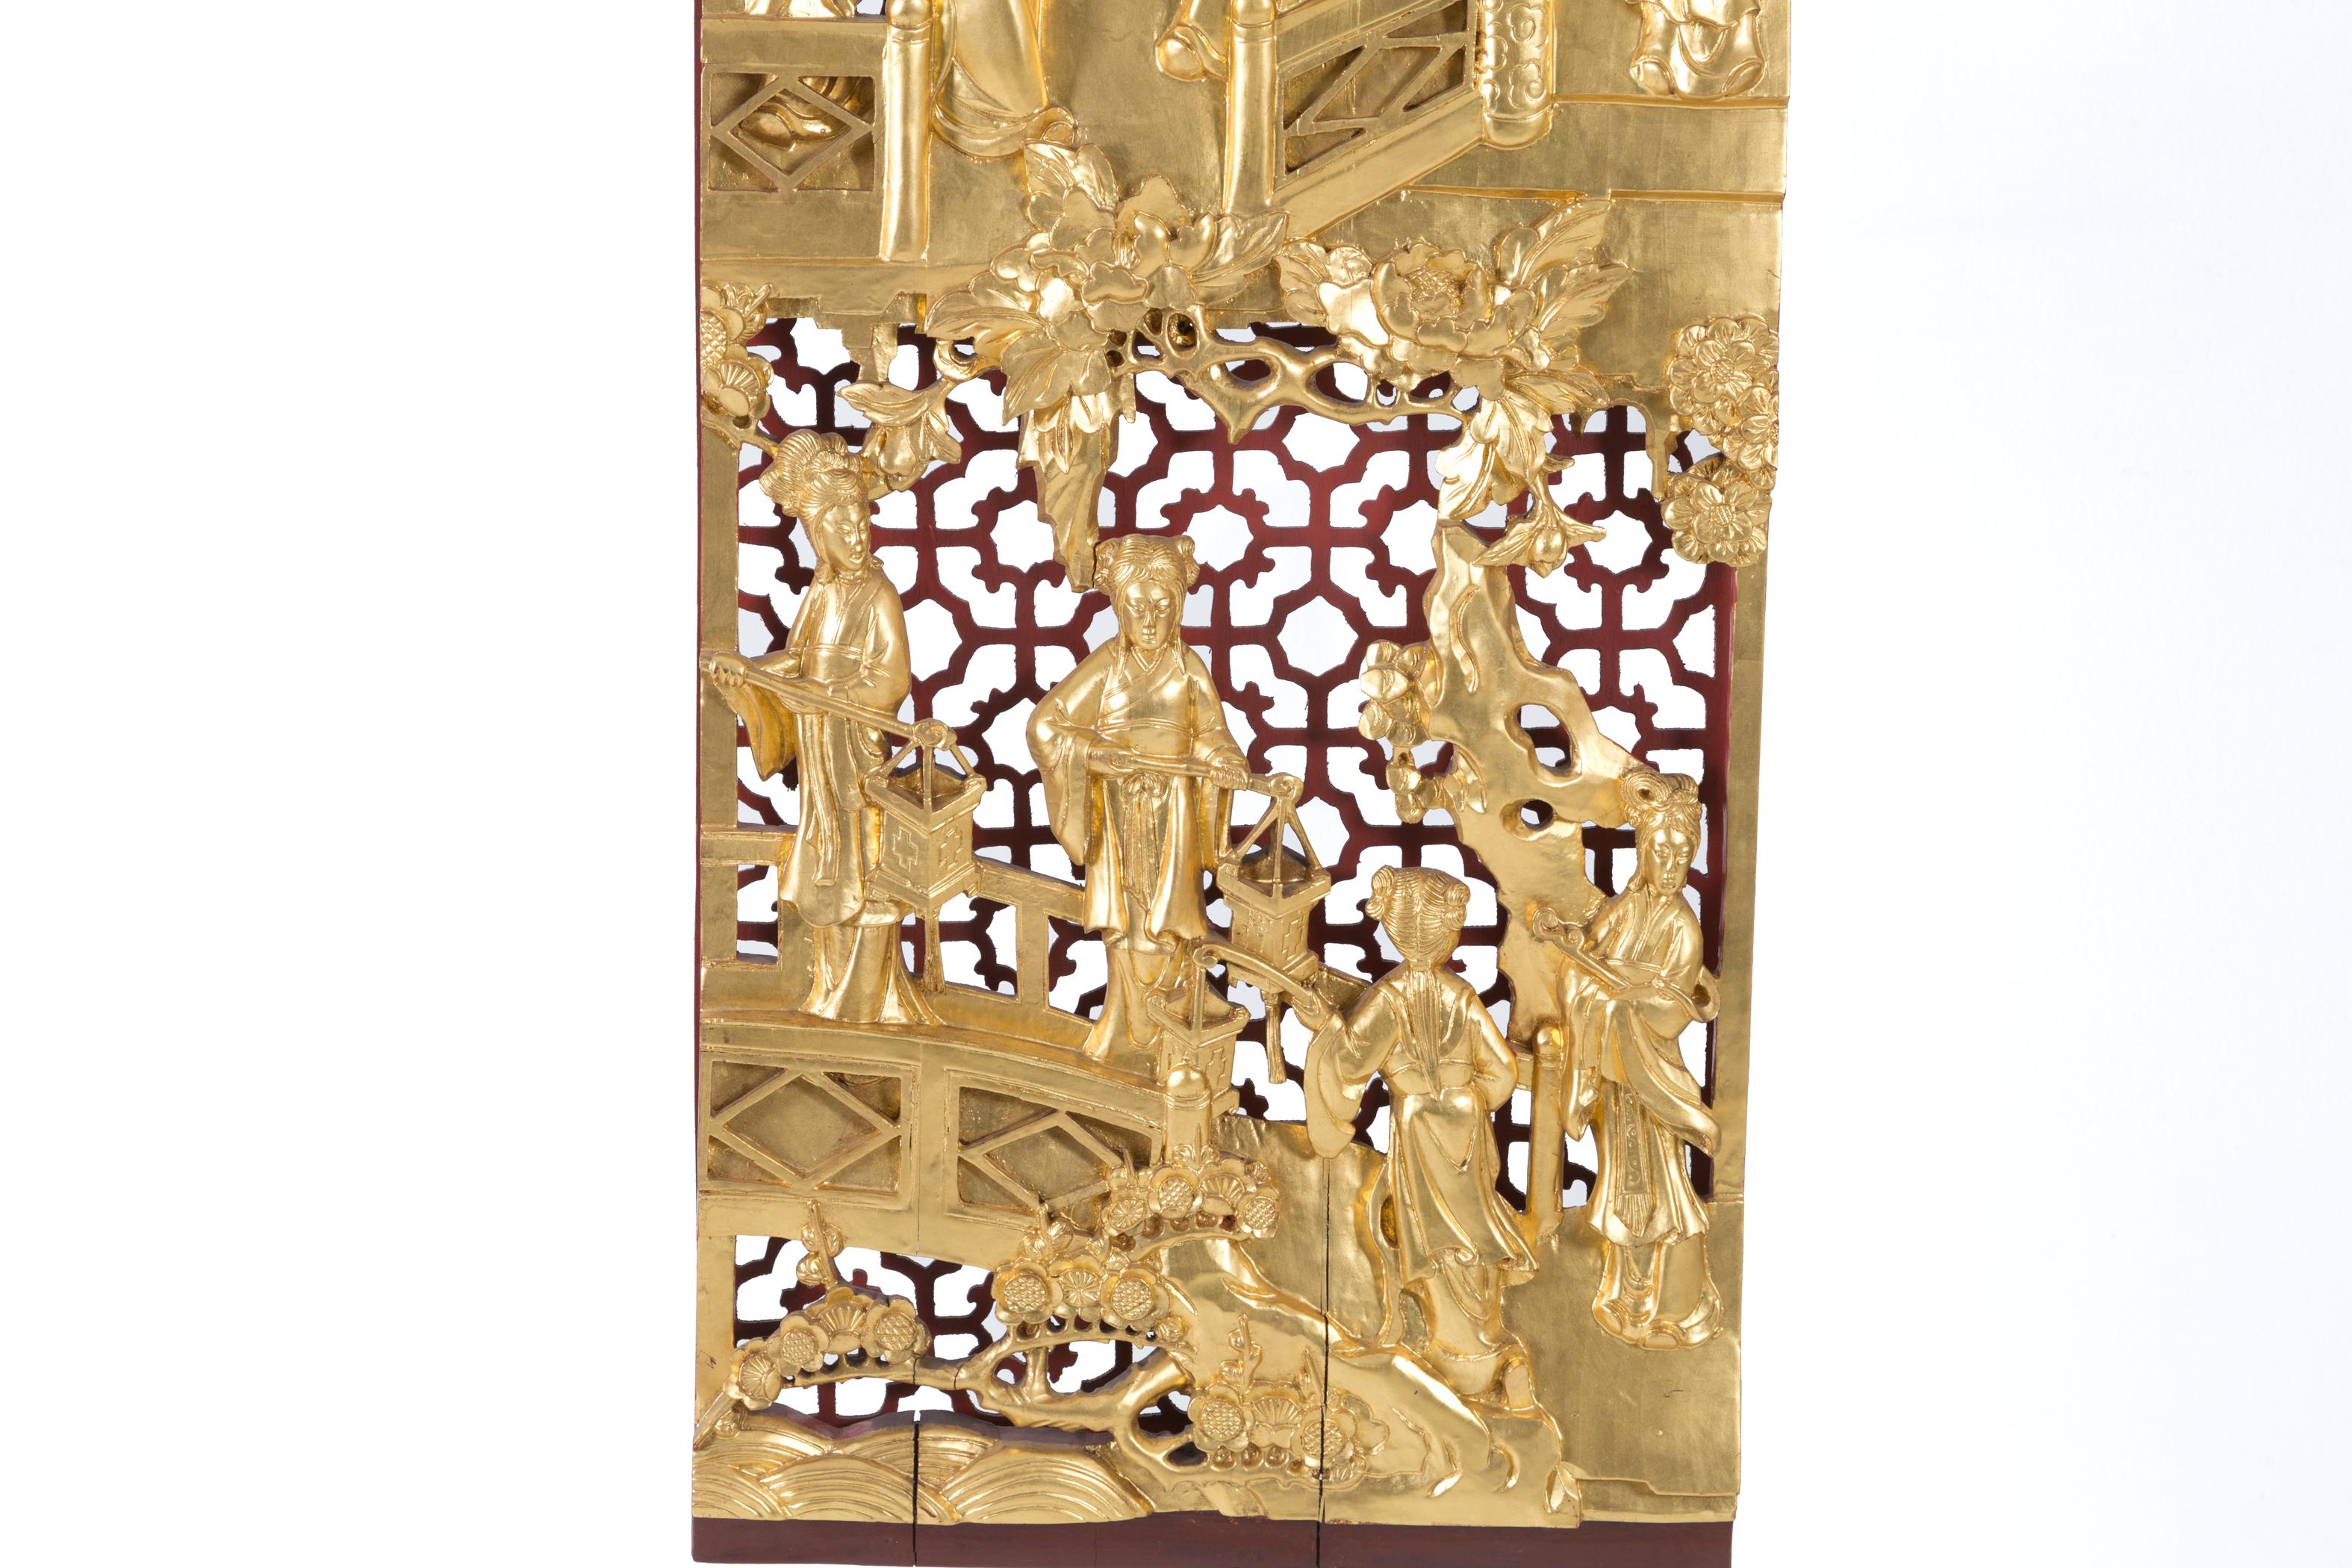 Large and bright panel, made up of five doors, made of carved and gilded wood. Scenes of life are depicted, A very beautiful and well done piece, richly decorated. The panel would adapt to any environment. The oriental furniture, especially in